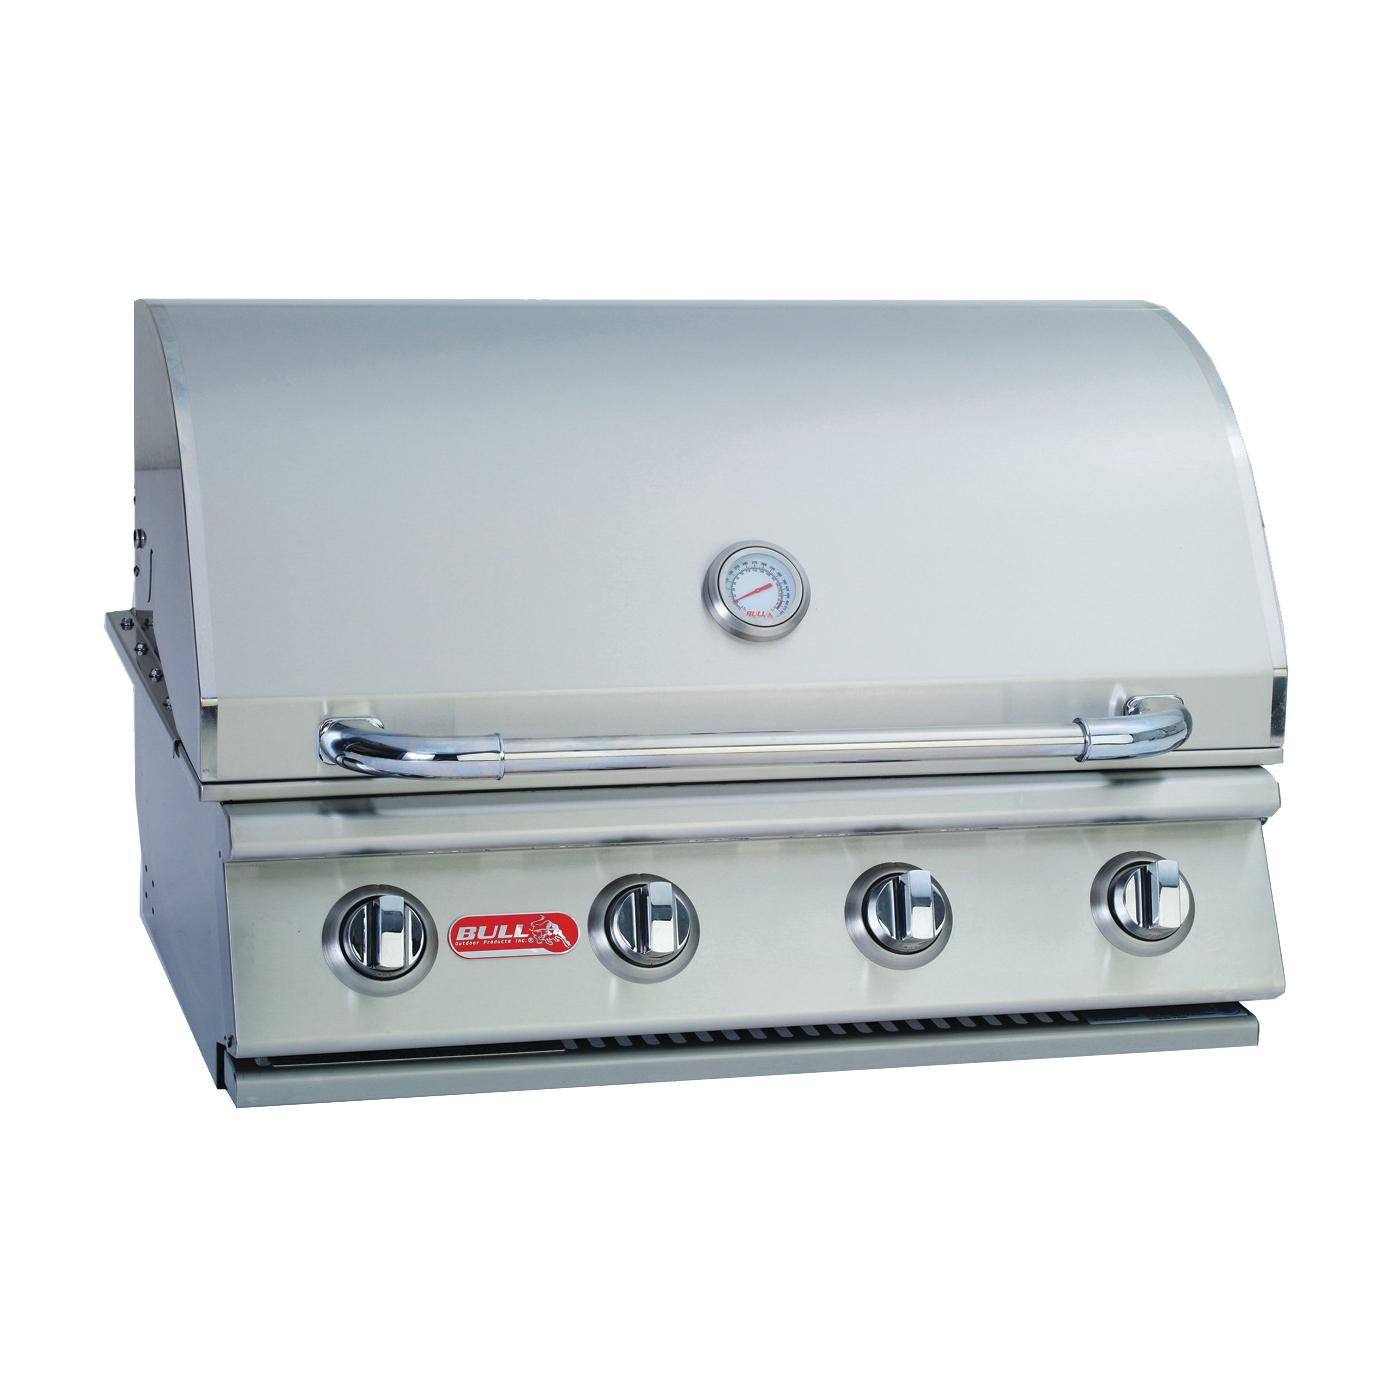 OUTLAW 26039 Gas Grill Head, 60000 Btu BTU, Natural Gas, 4 -Burner, 210 sq-in Secondary Cooking Surface